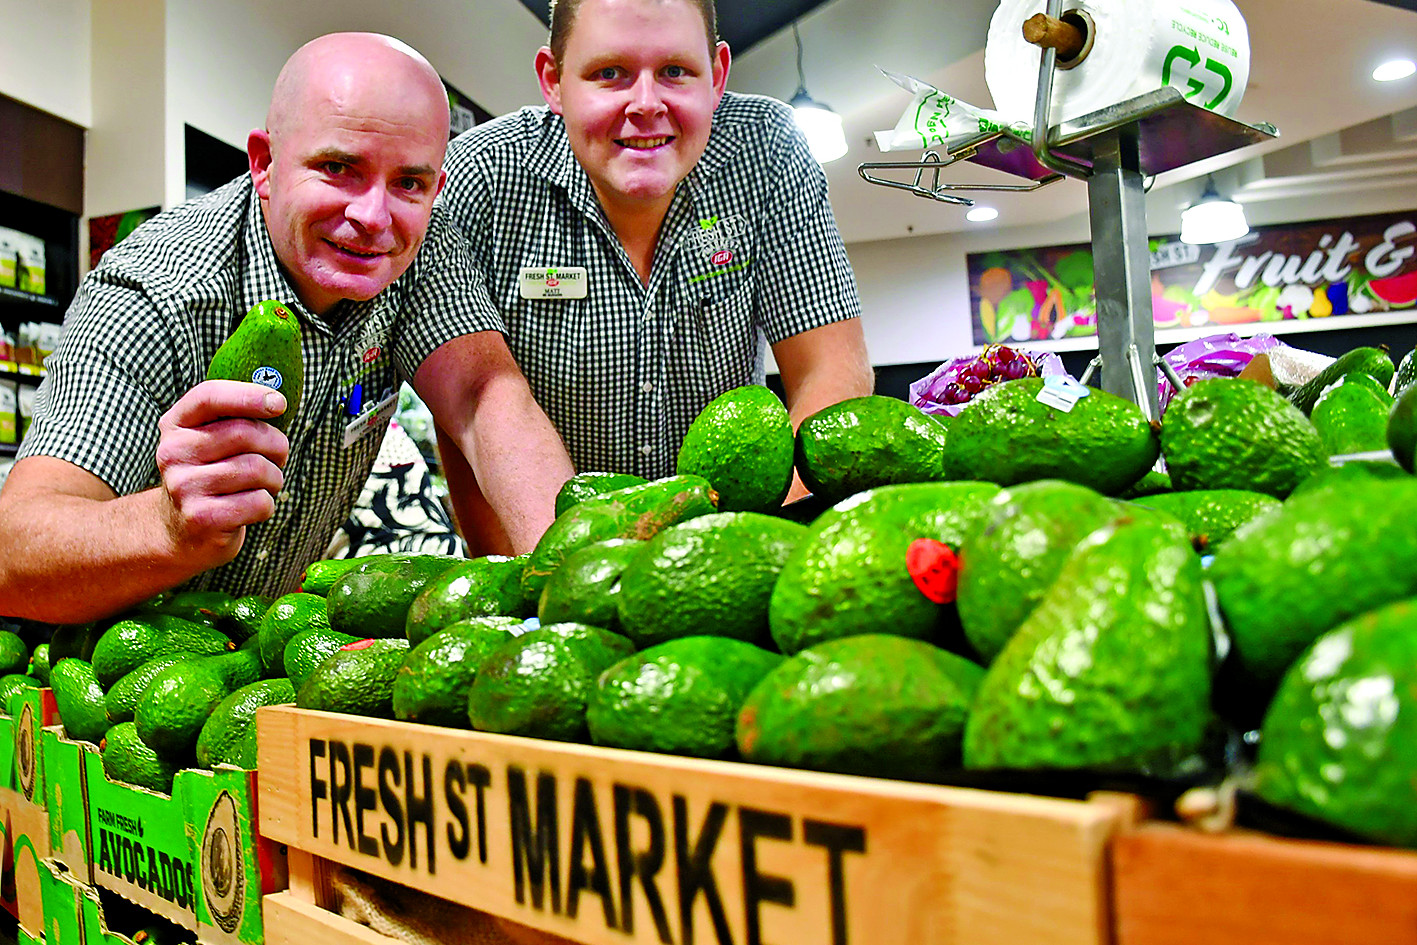 Fresh Street Market IGA in Atherton has once again been awarded for their fresh produce at the IGA Queensland Conference and Awards night.